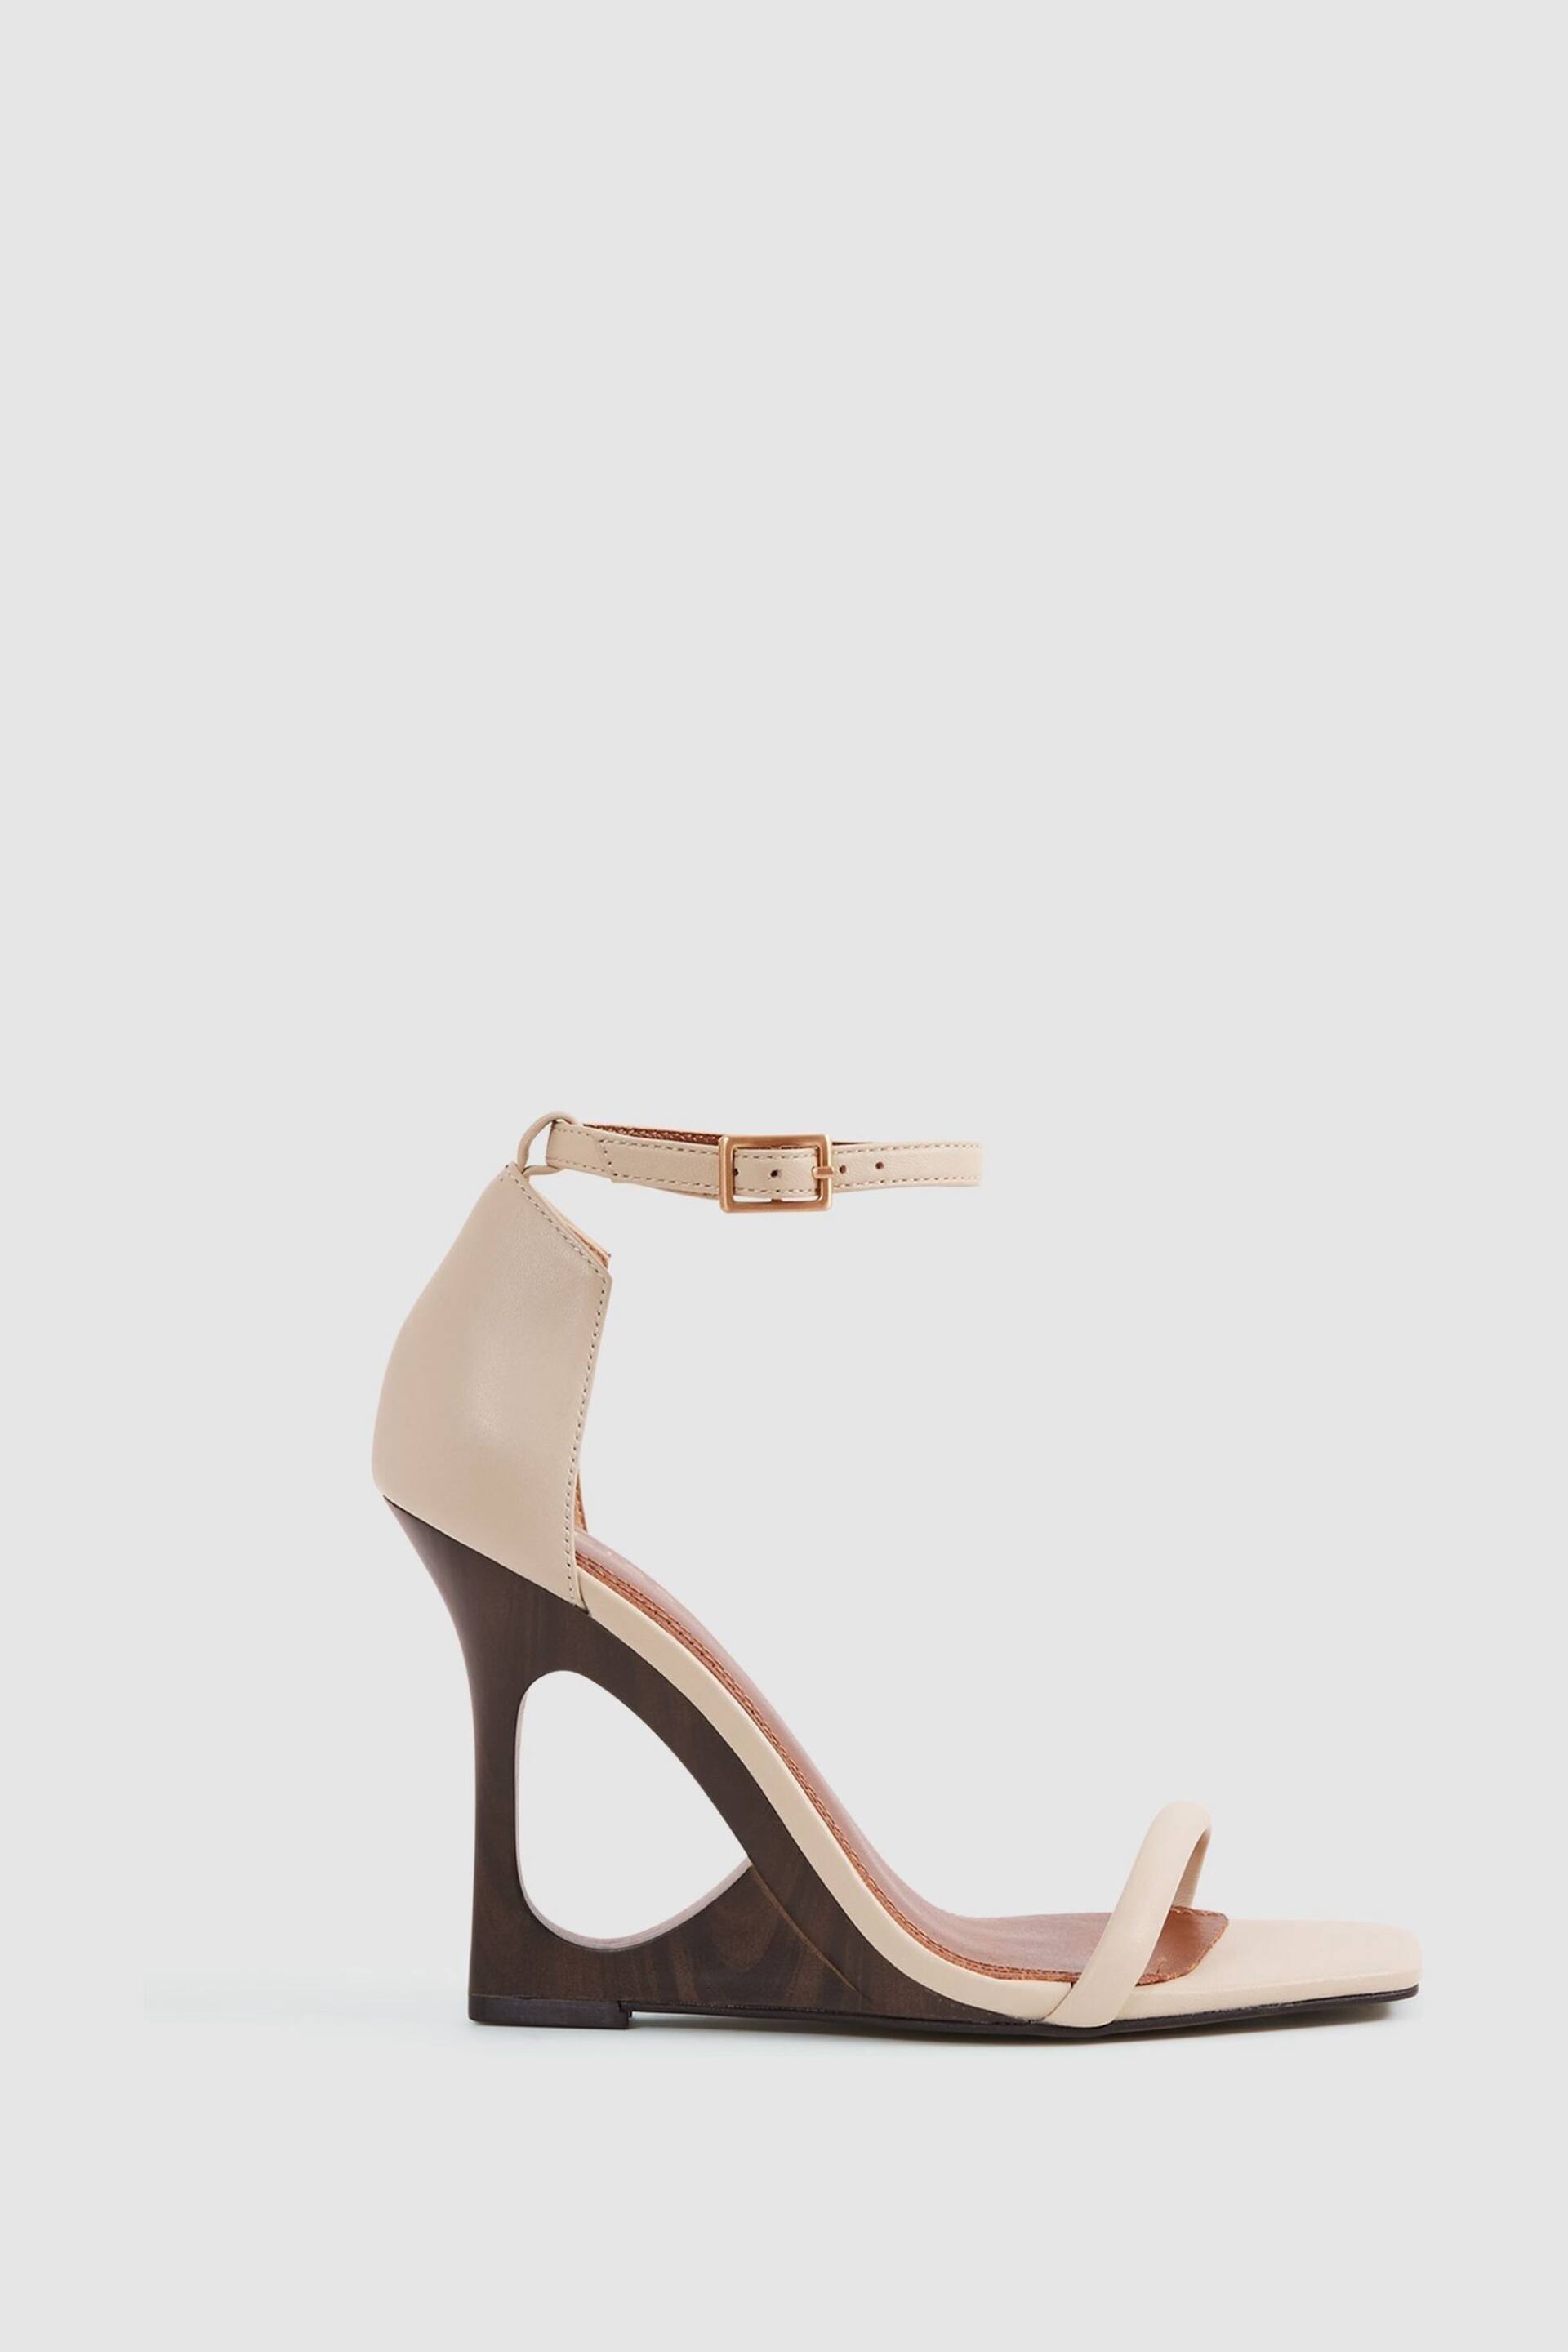 Reiss Off White Cora Leather Strappy Wedge Heels - Image 1 of 6